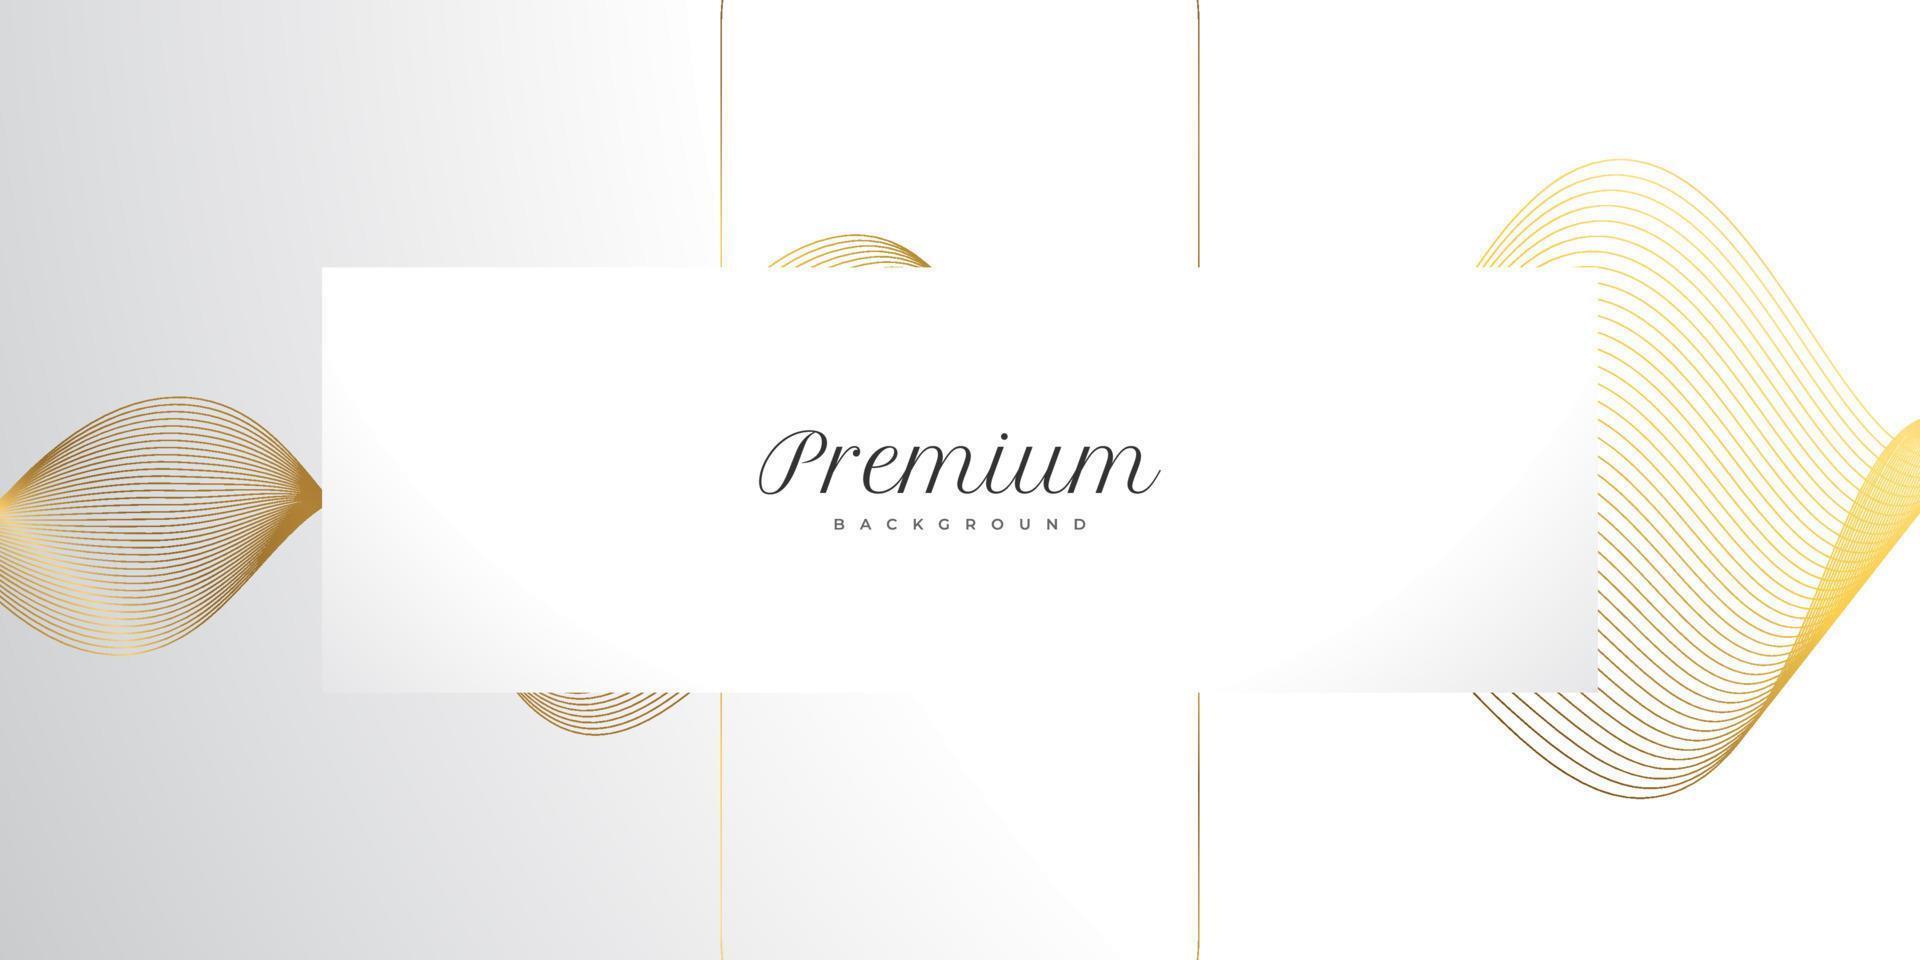 Luxury Background with Wavy Gold Lines. Premium Gray and Gold Background for Award, Nomination, Ceremony, Formal Invitation or Certificate Design vector